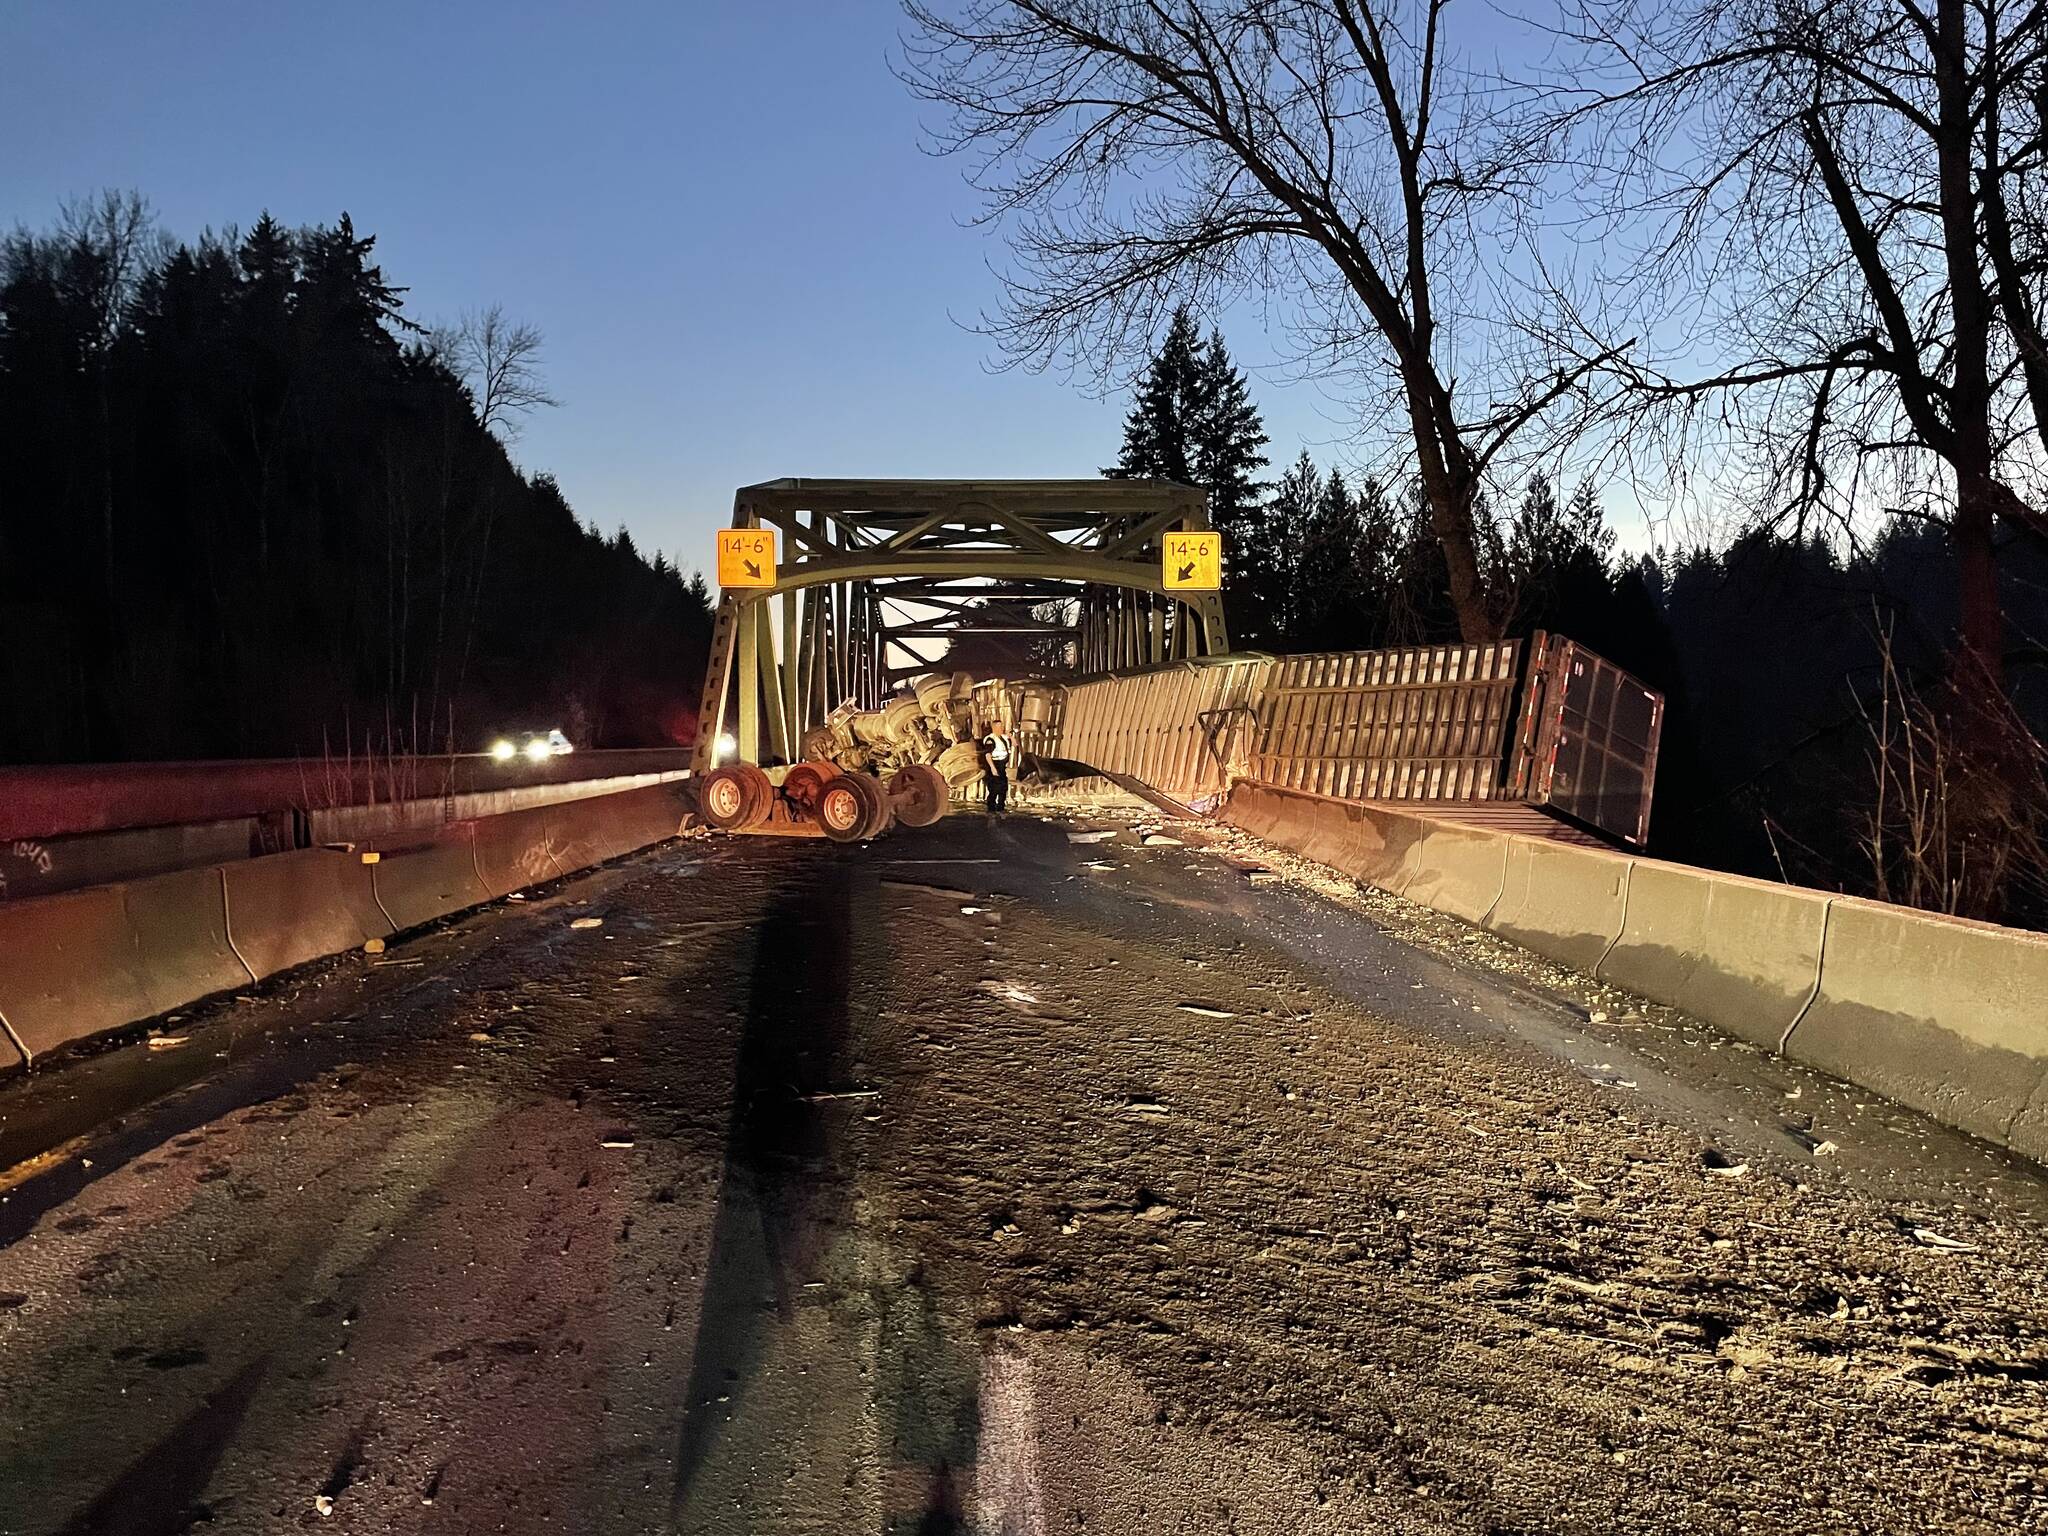 The scene of the semi-truck collision on SR 18 in Auburn posted at 6:49 a.m. Tuesday, March 19. (Courtesy of the Zone 3 PIOS.)